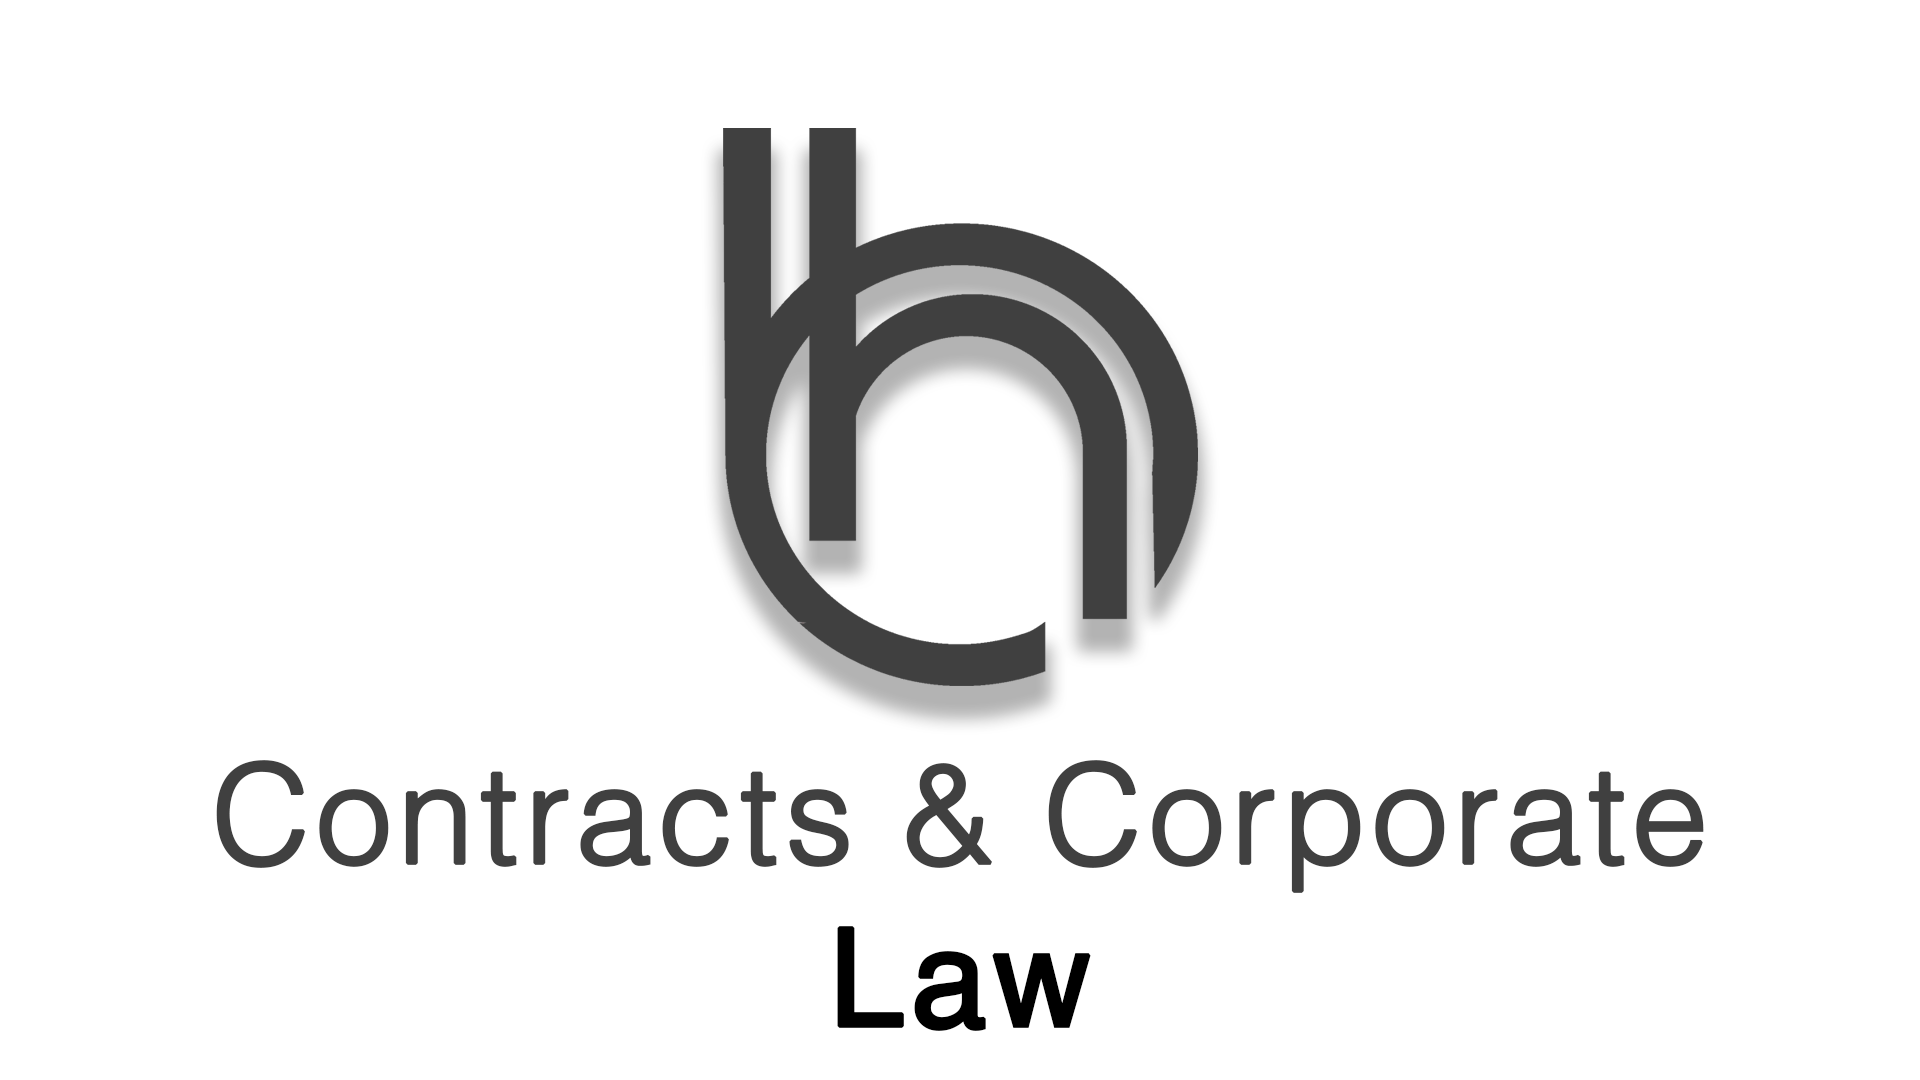 Contracts & Corporate Law